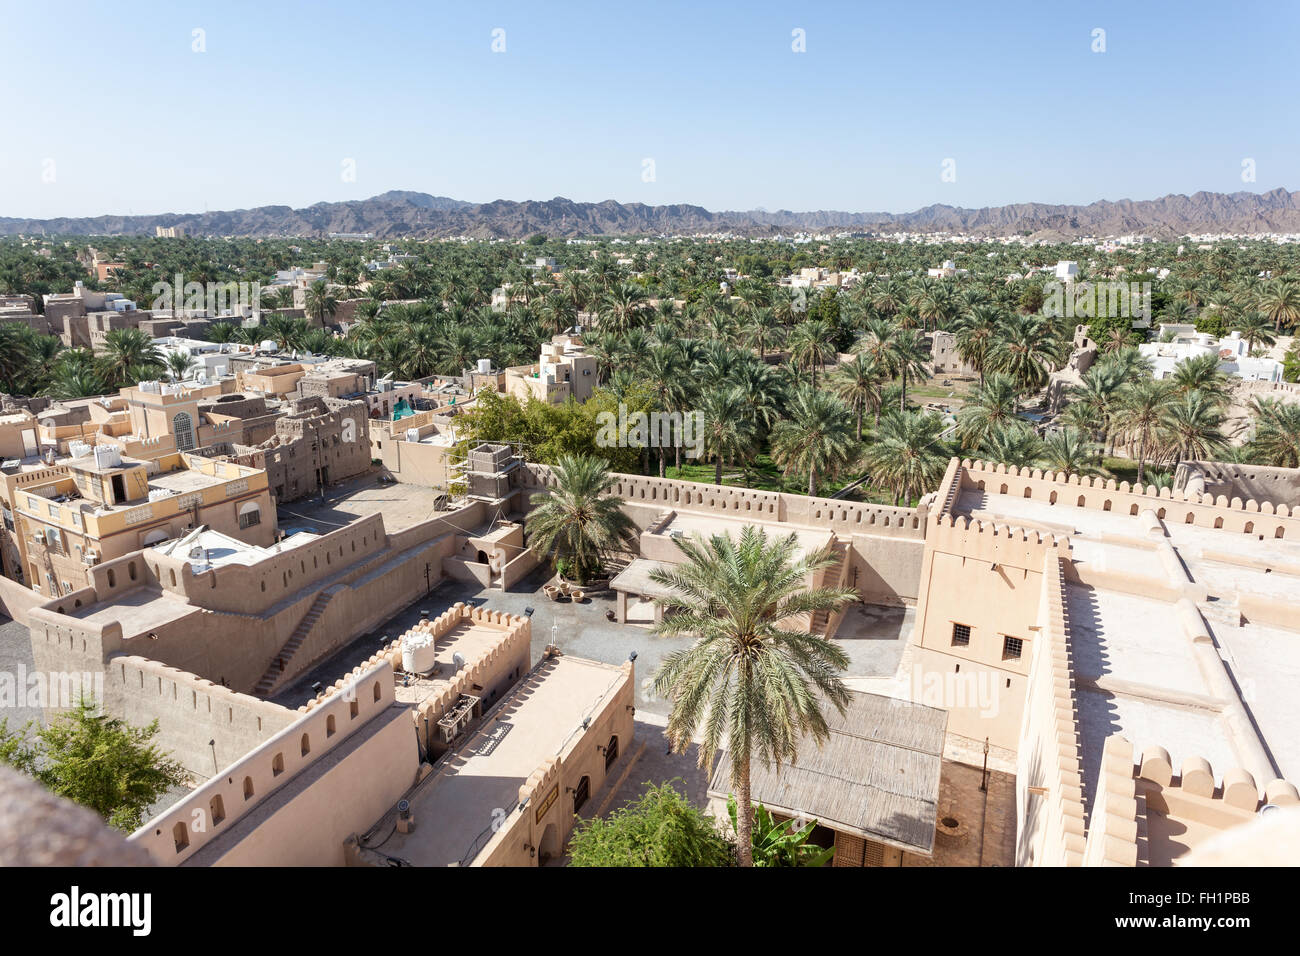 View over the oasis in the city of Nizwa, Sultanate of Oman, Middle East Stock Photo